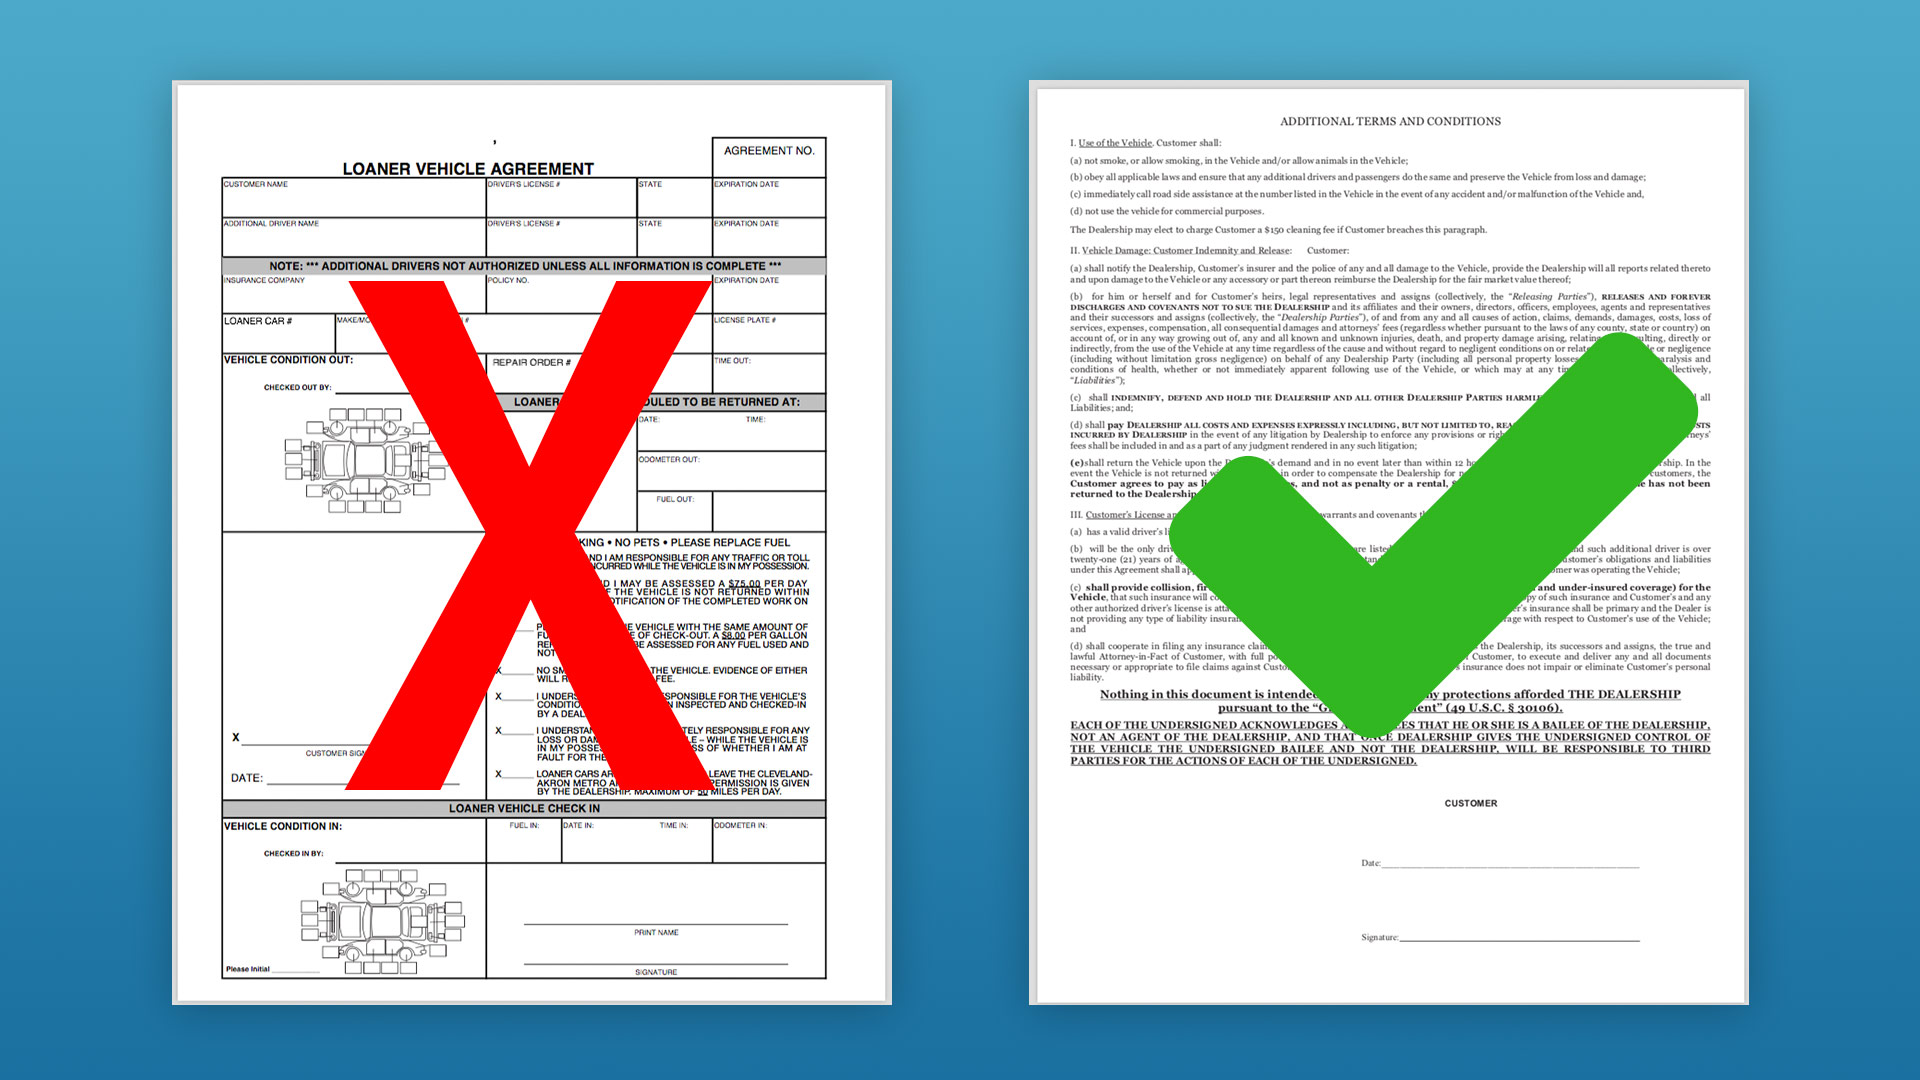 Image: Dealerware Customer Agreement, showing required information to scan and upload